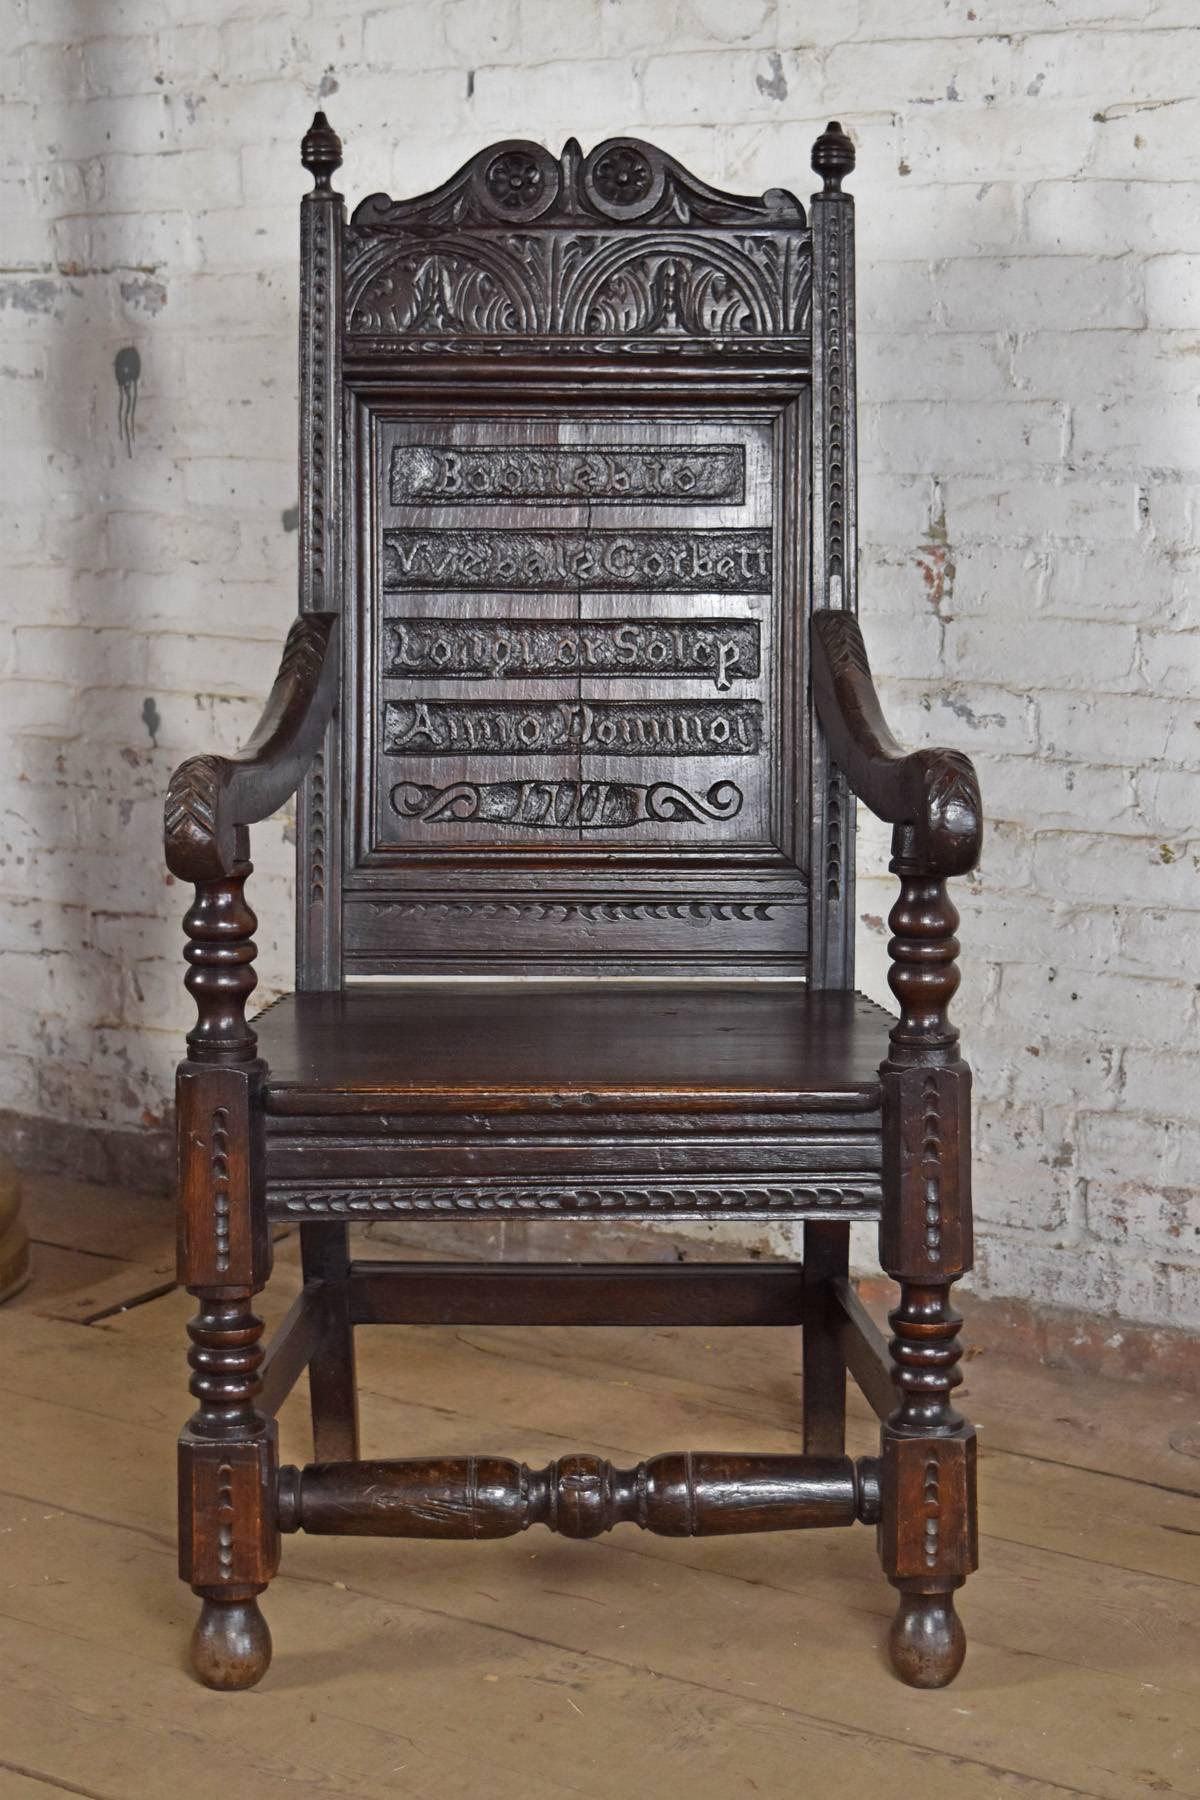 Open Armchair of typical Wainscot form, the straight paneled back adorned with carved lettering probably documenting family event, wavy armrests with Primitive carved decoration, paneled seat above a frieze, front legs and stretcher turned and chip